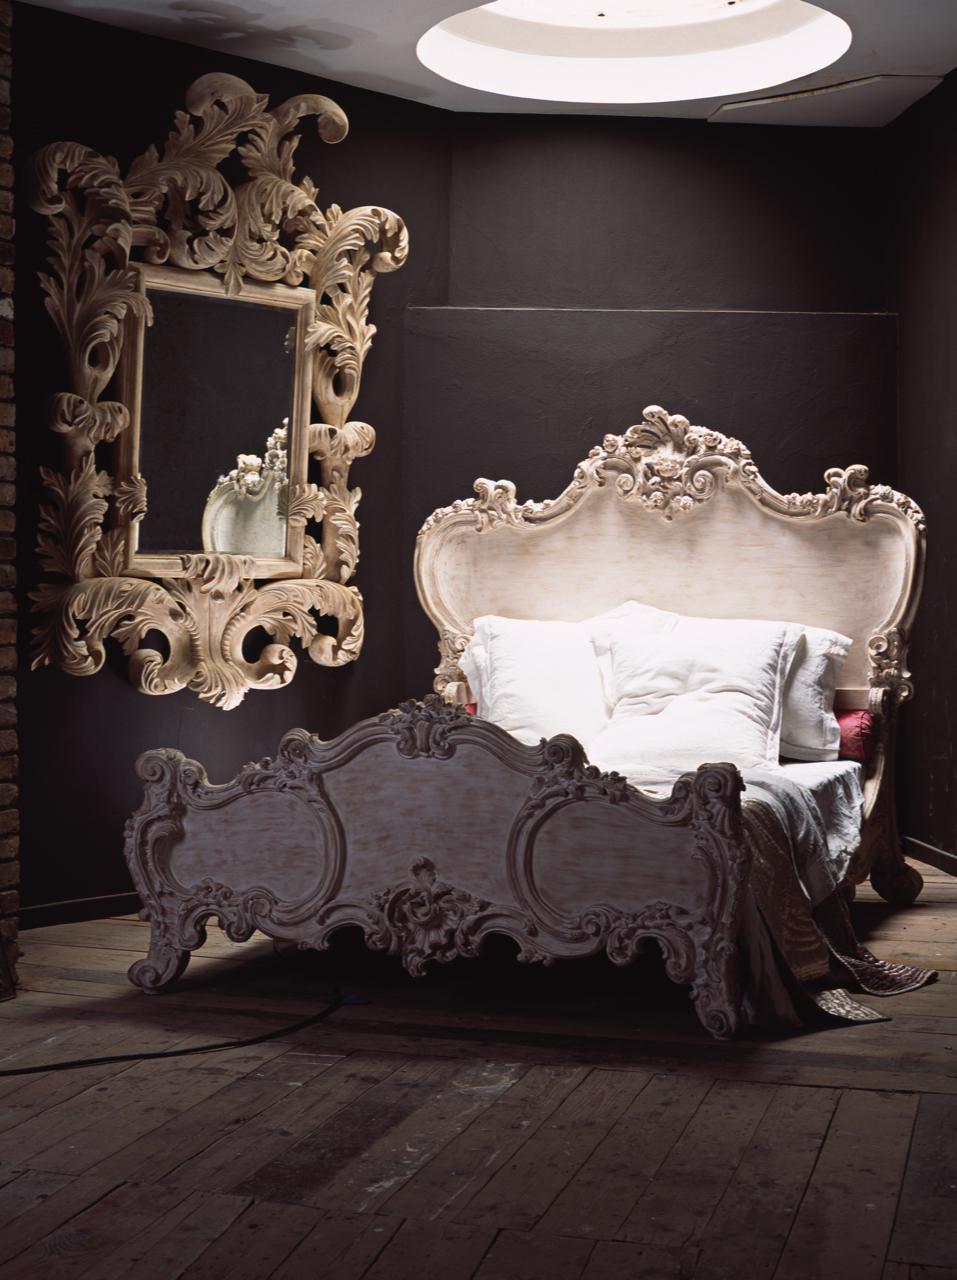 The Cherub Bed Hand Crafted In The Rococo Style Made By La Maison London 2